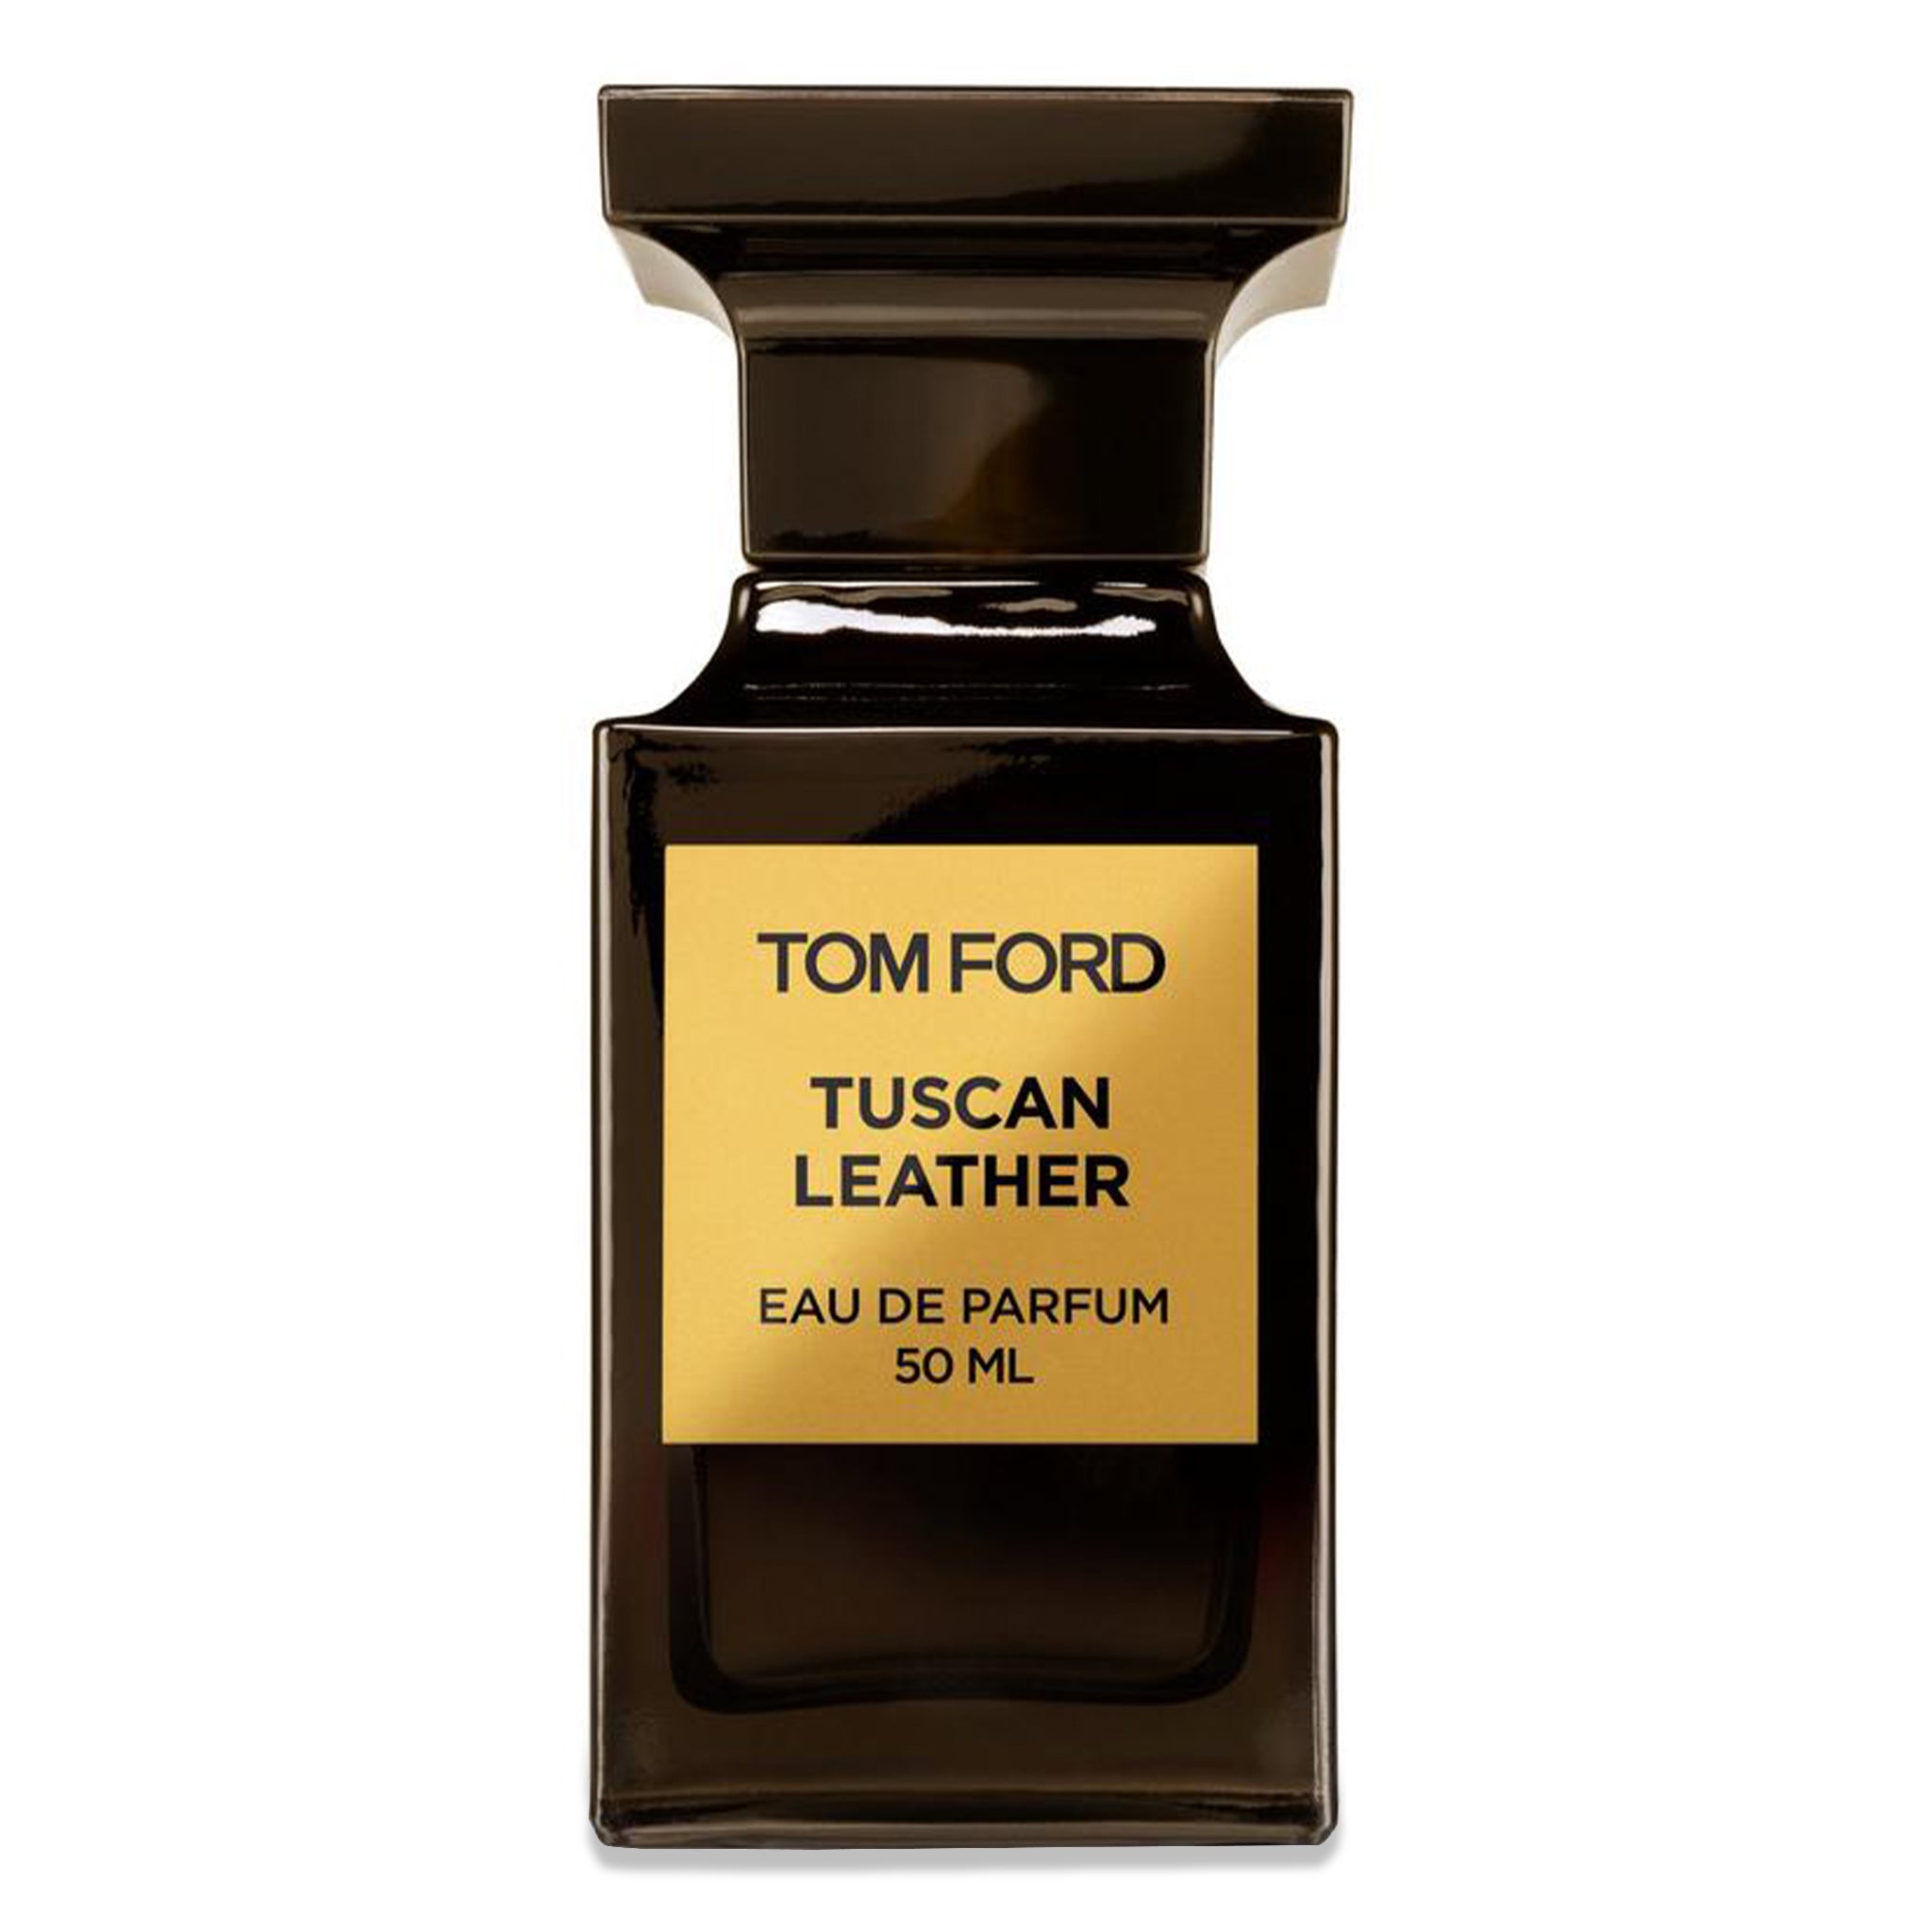 Image of Tom Ford Private Blend Tuscan Leather Eau De Parfum 50ml